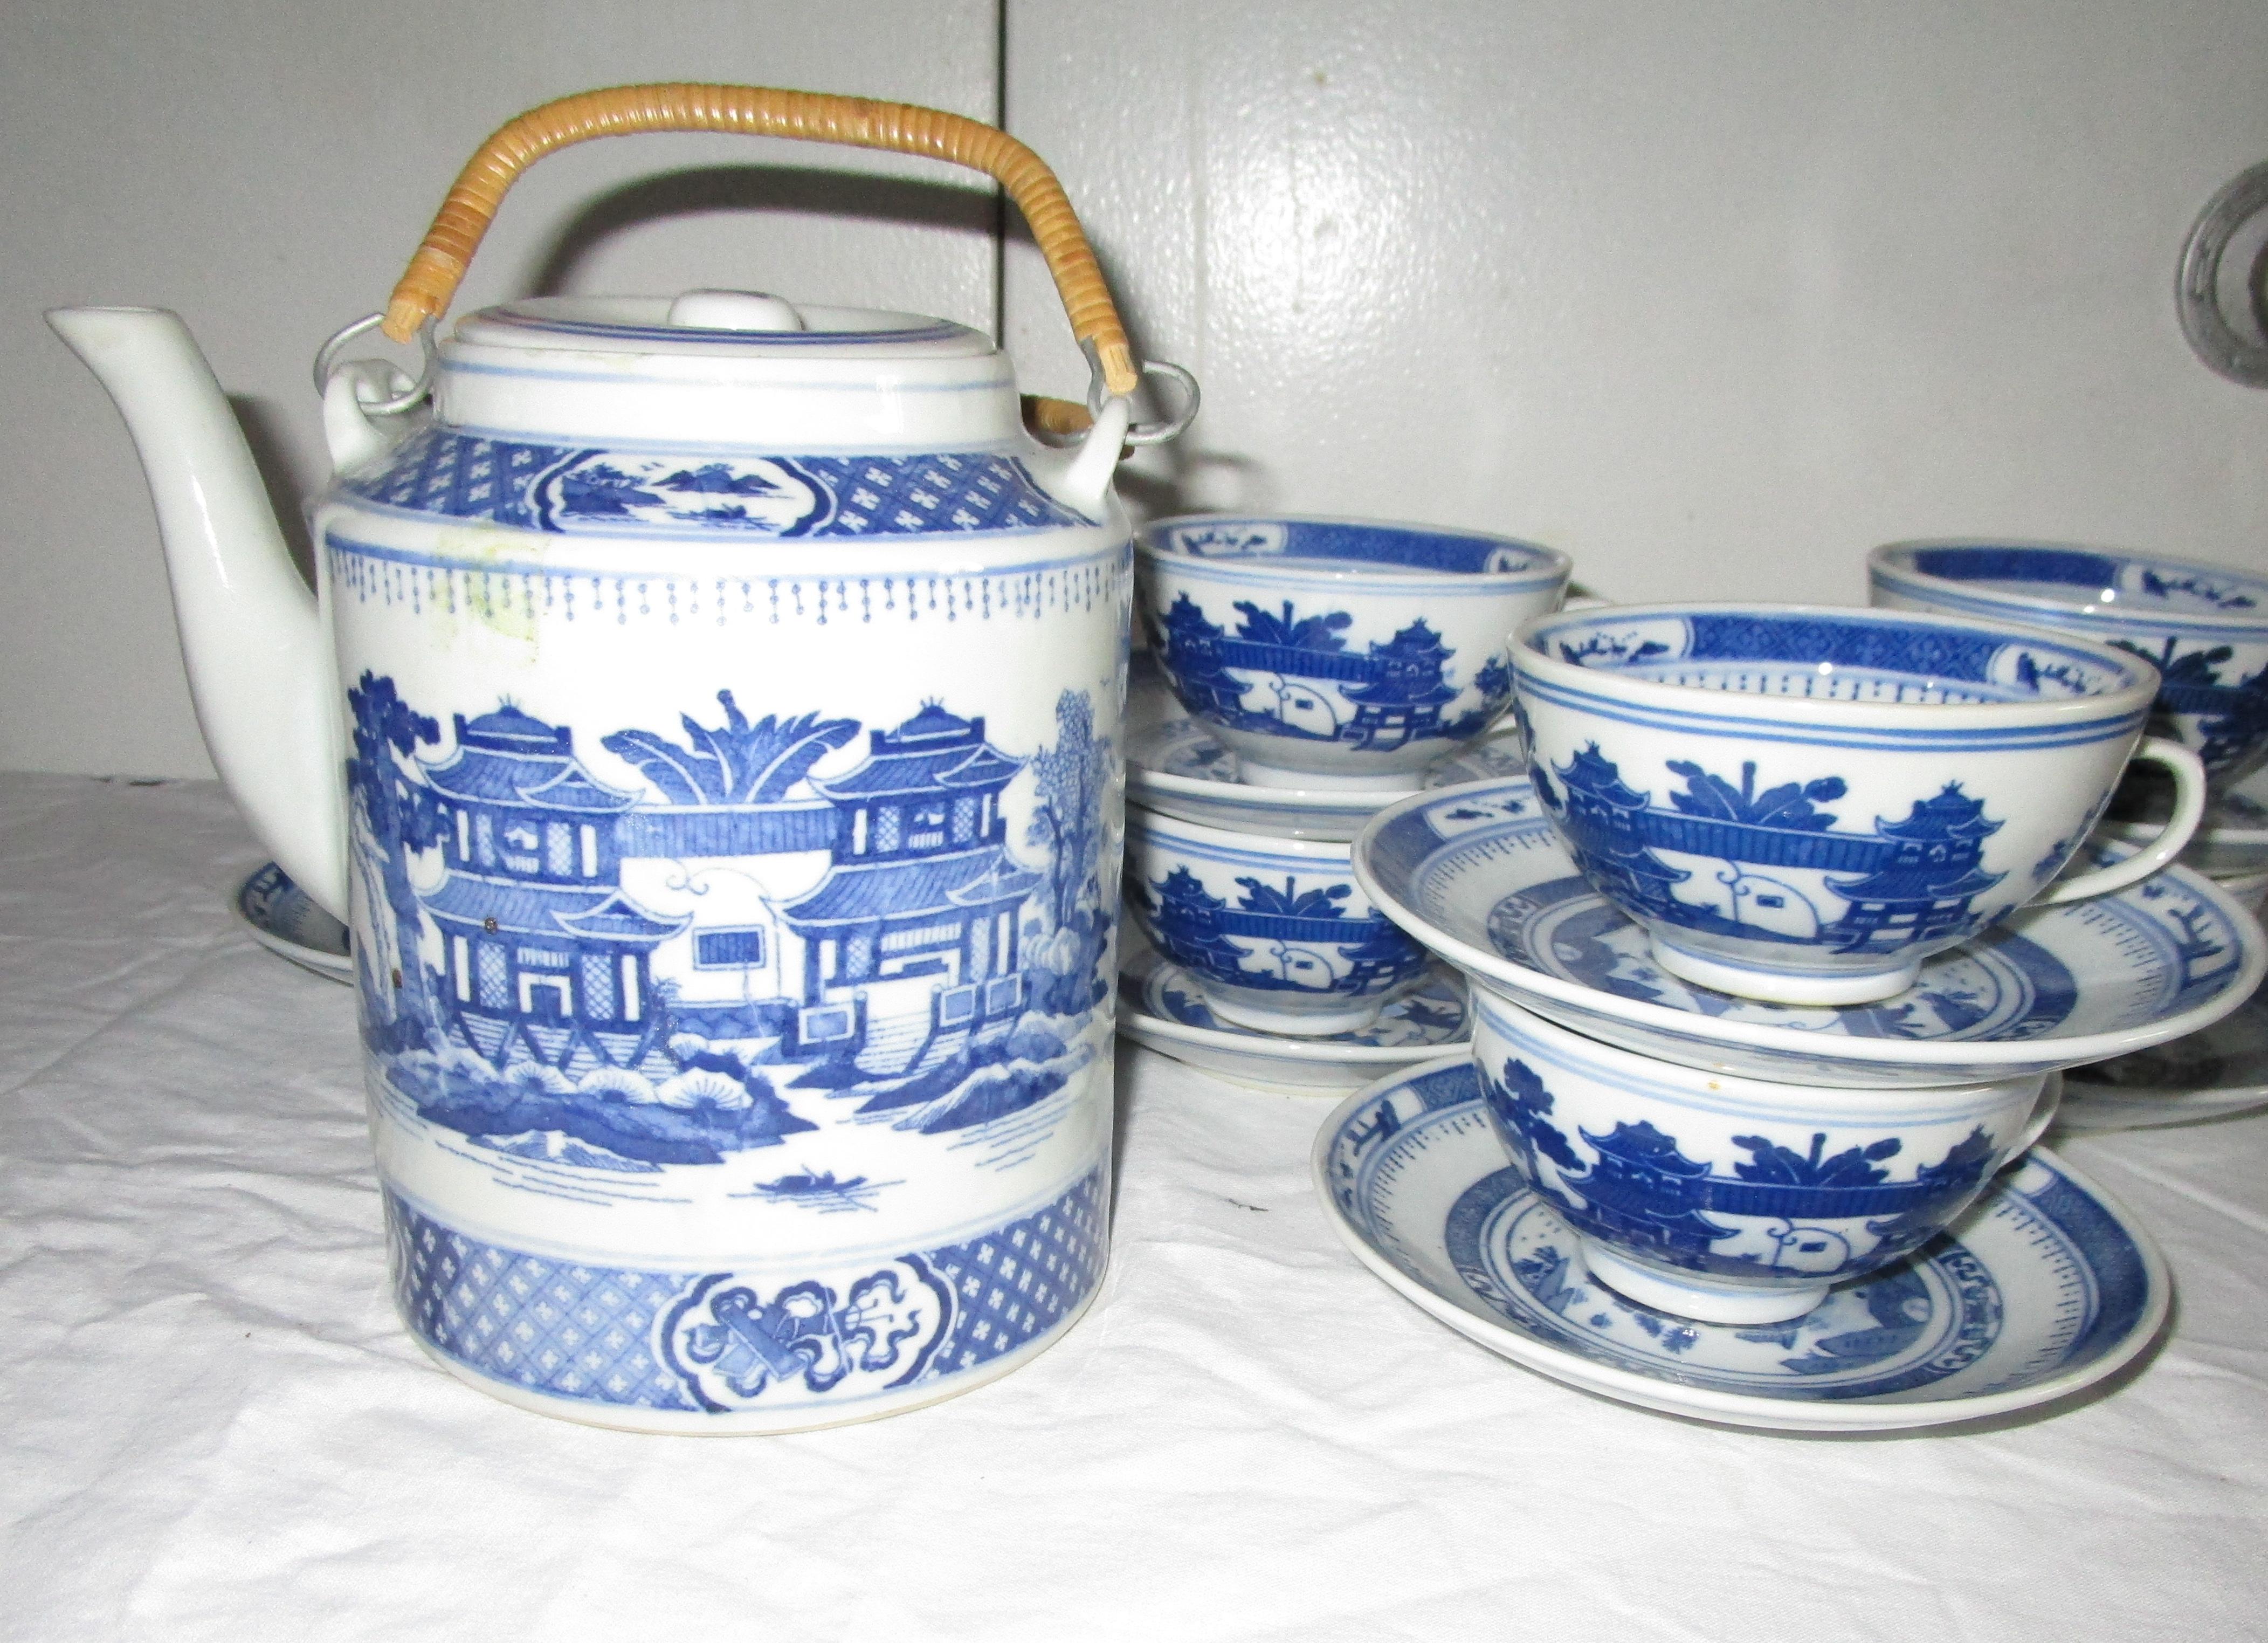 Nanking Blue and White Porcelain Vintage 23 Piece Tea and Meal Service In Good Condition For Sale In Lomita, CA